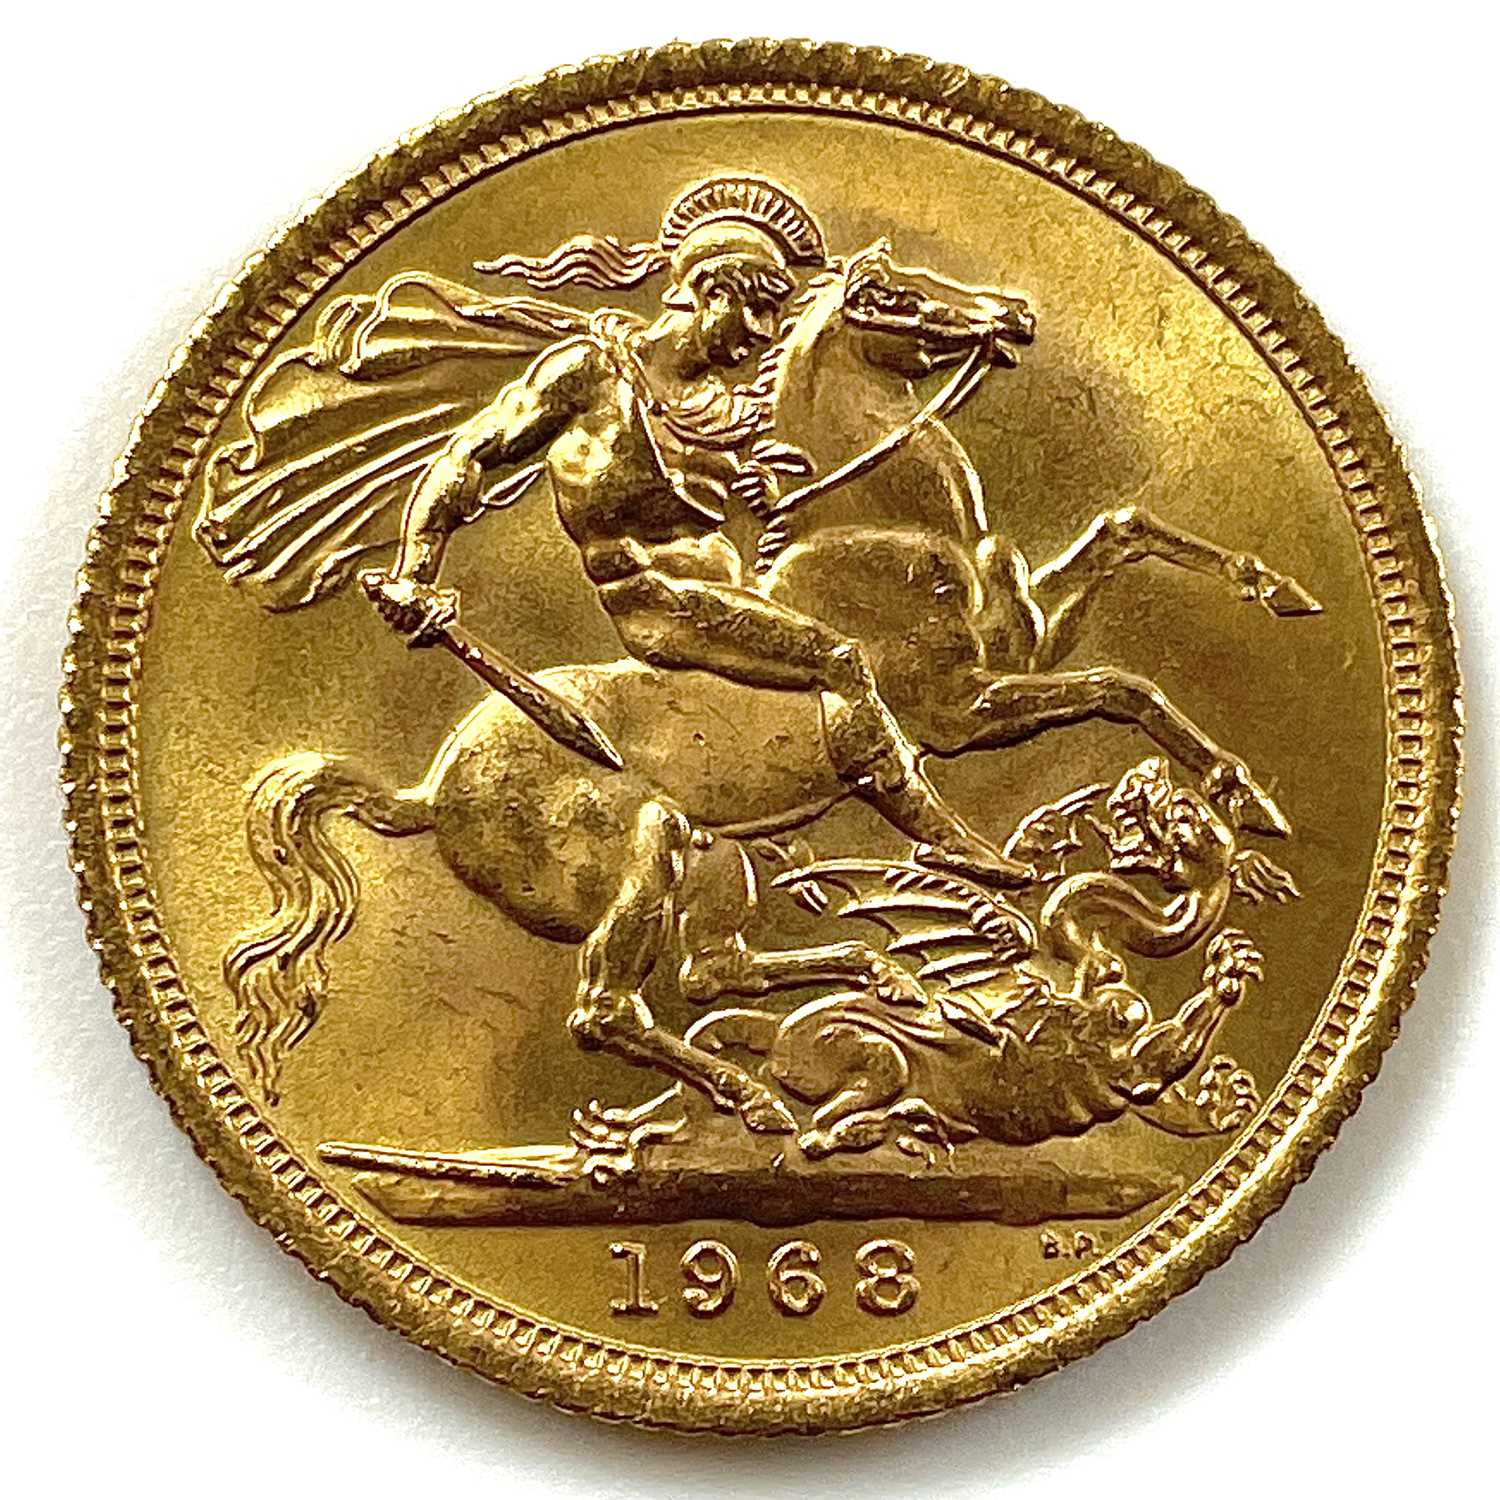 Lot 82 - A 1968 full sovereign coin.